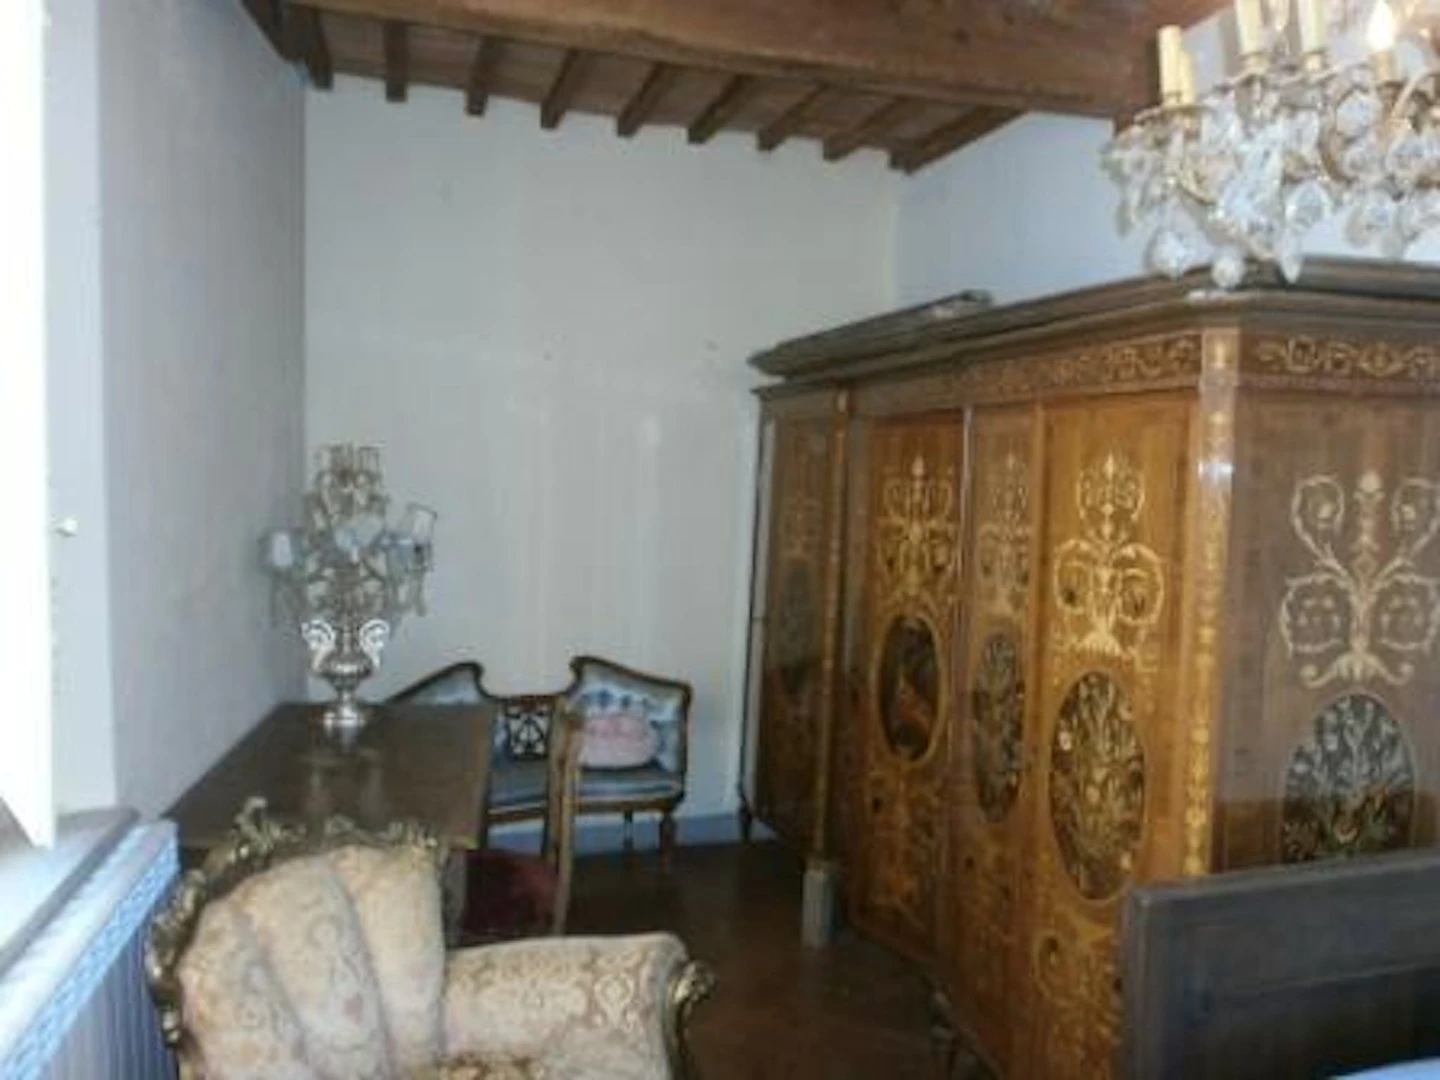 Room for rent in a shared flat in Pisa